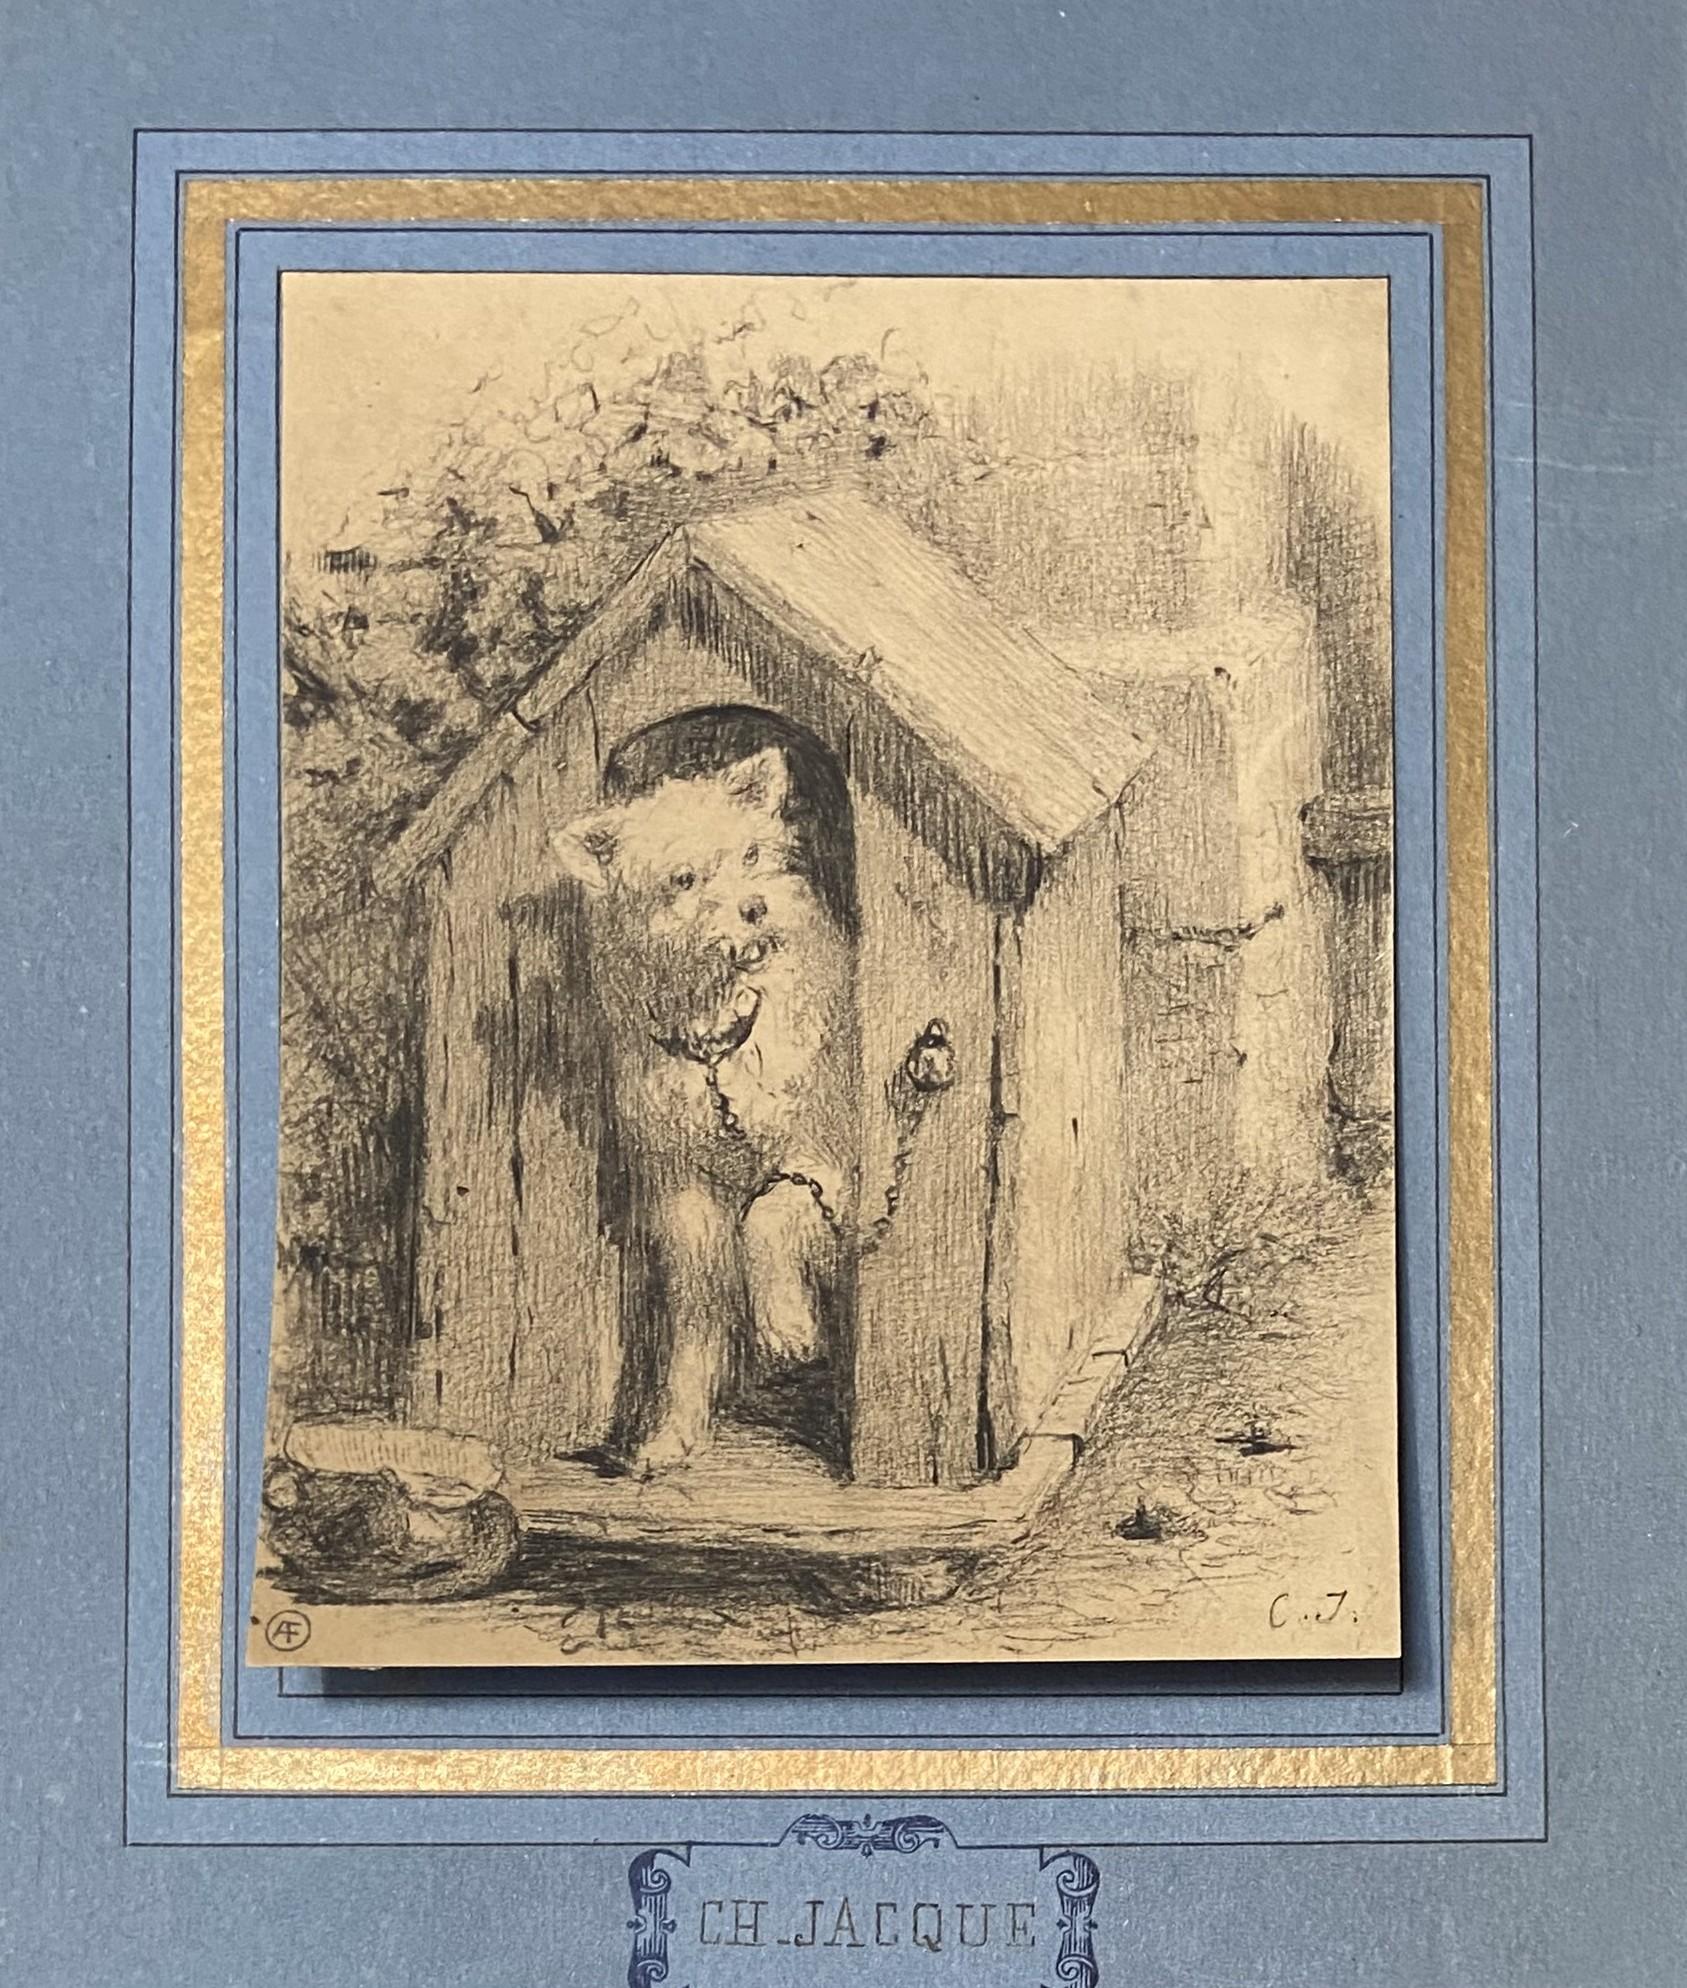 Charles Emile Jacque (1813-1894)
Dog in a doghouse
Monogrammed 